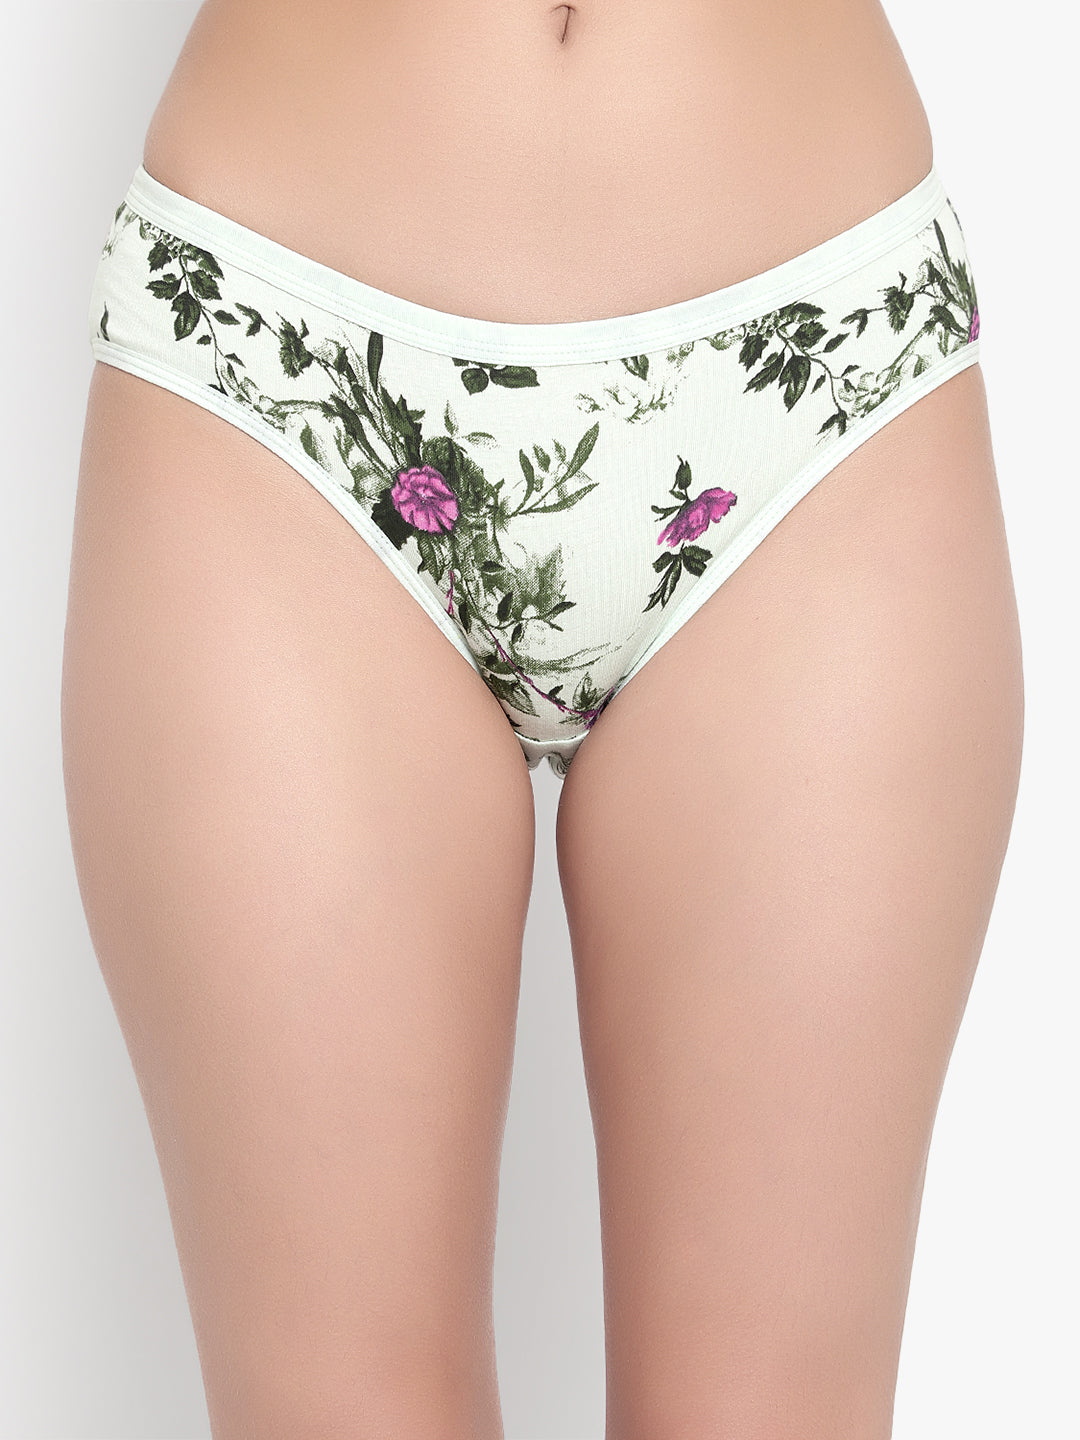 Bruchi Club Women Floral Printed Cotton Low Waist Hipster Panty